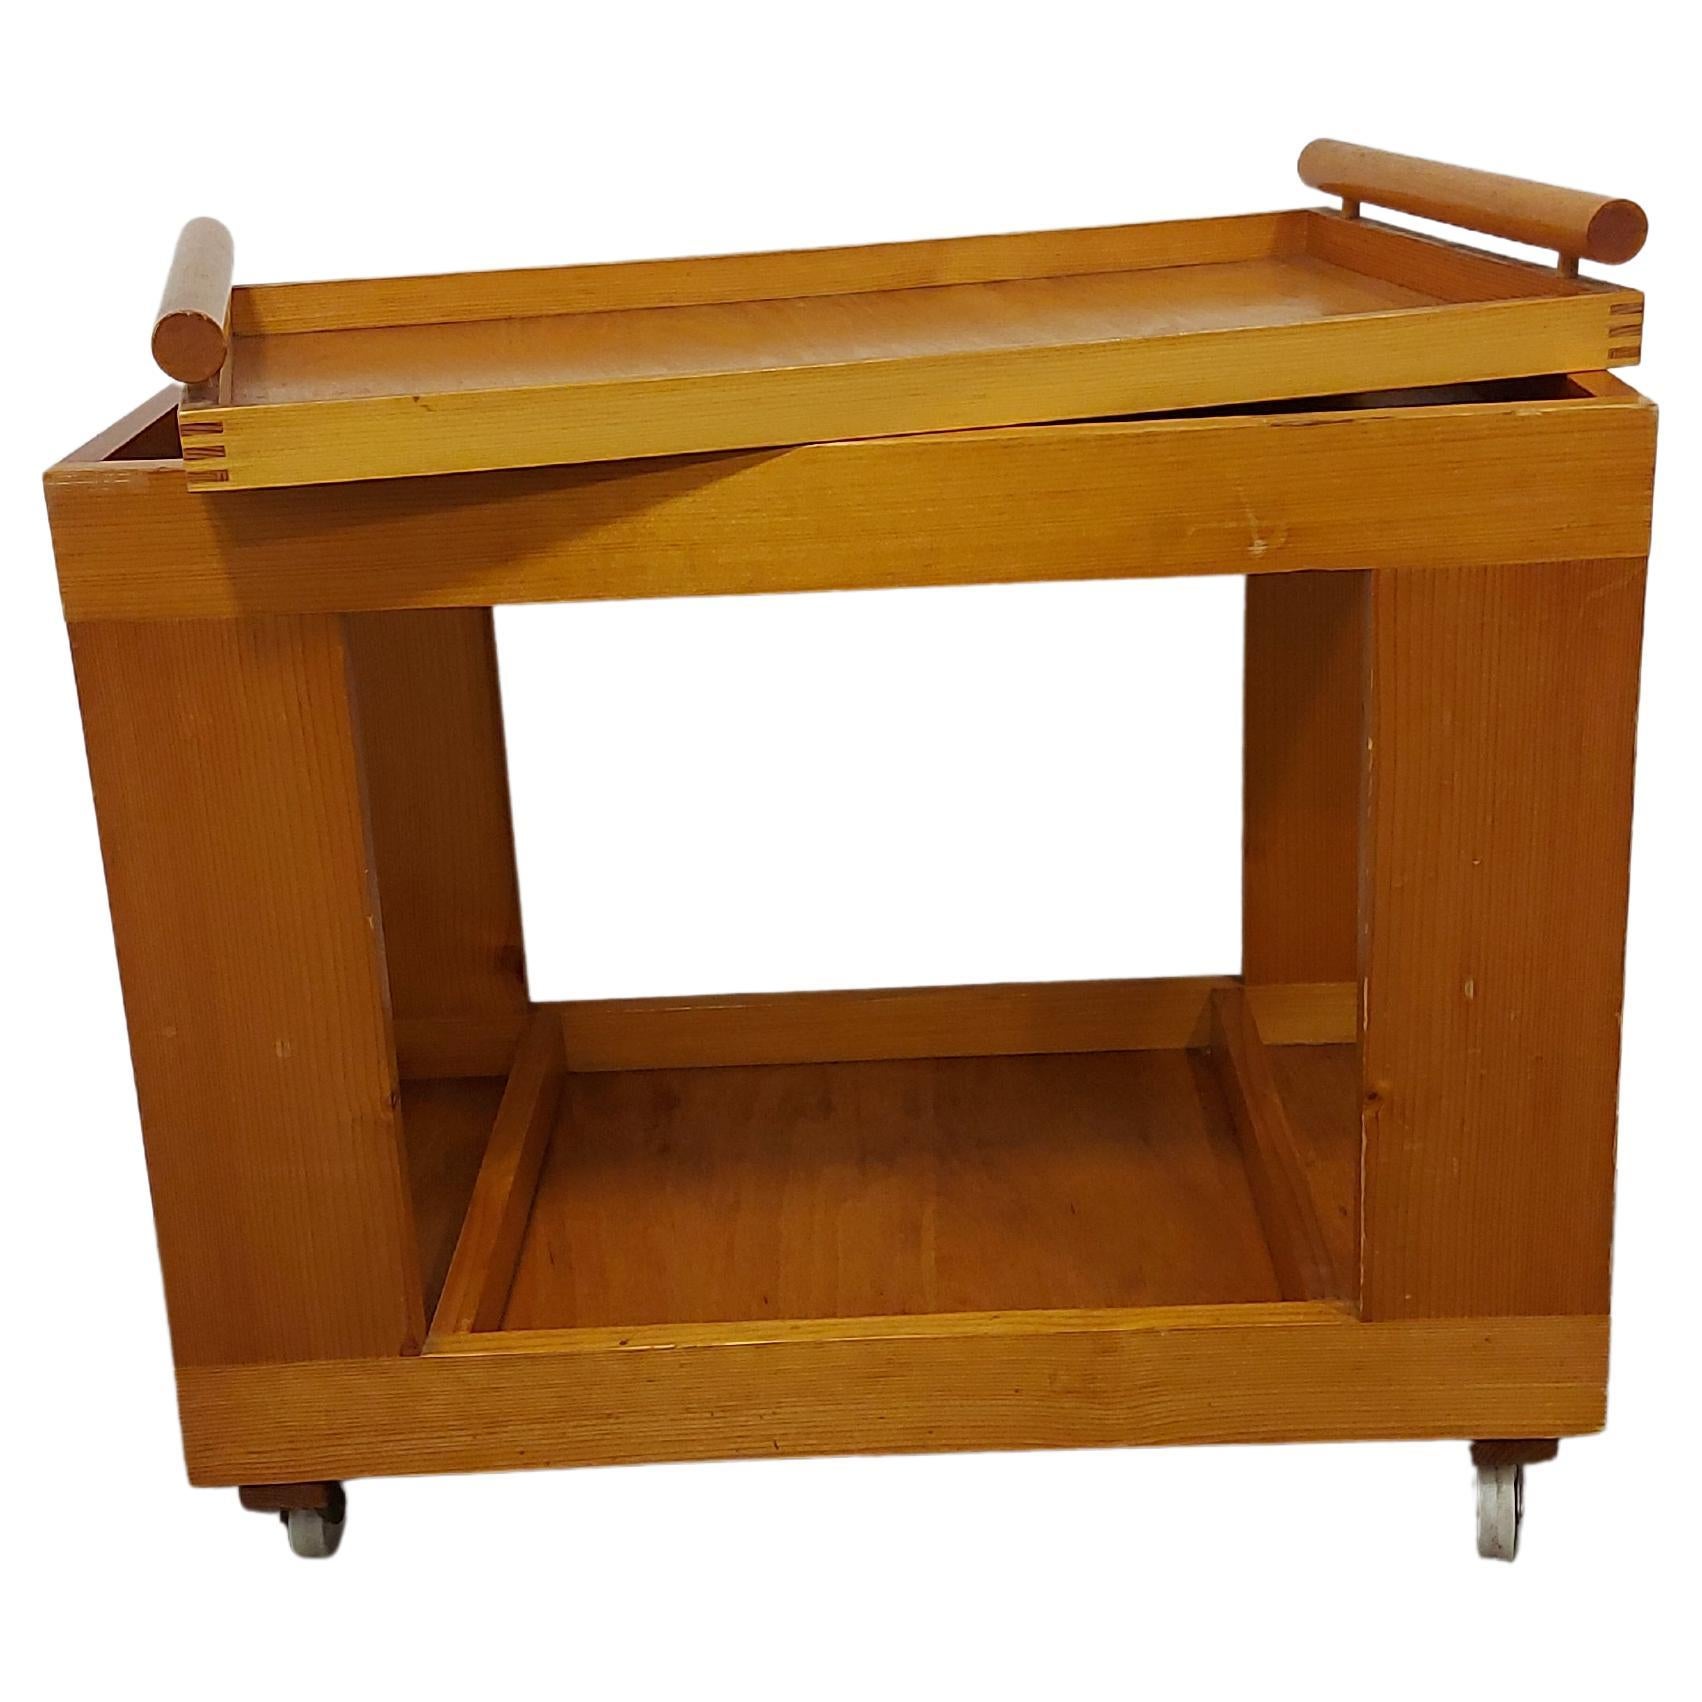 Bar Cart 1970s - solid wood

Part of the cart is also an integrated tray, which, placed on top of the cart, represents an integral part of the cart.
Cart has wheels that rotate in all directions and allows smooth movement.

Two tiered for